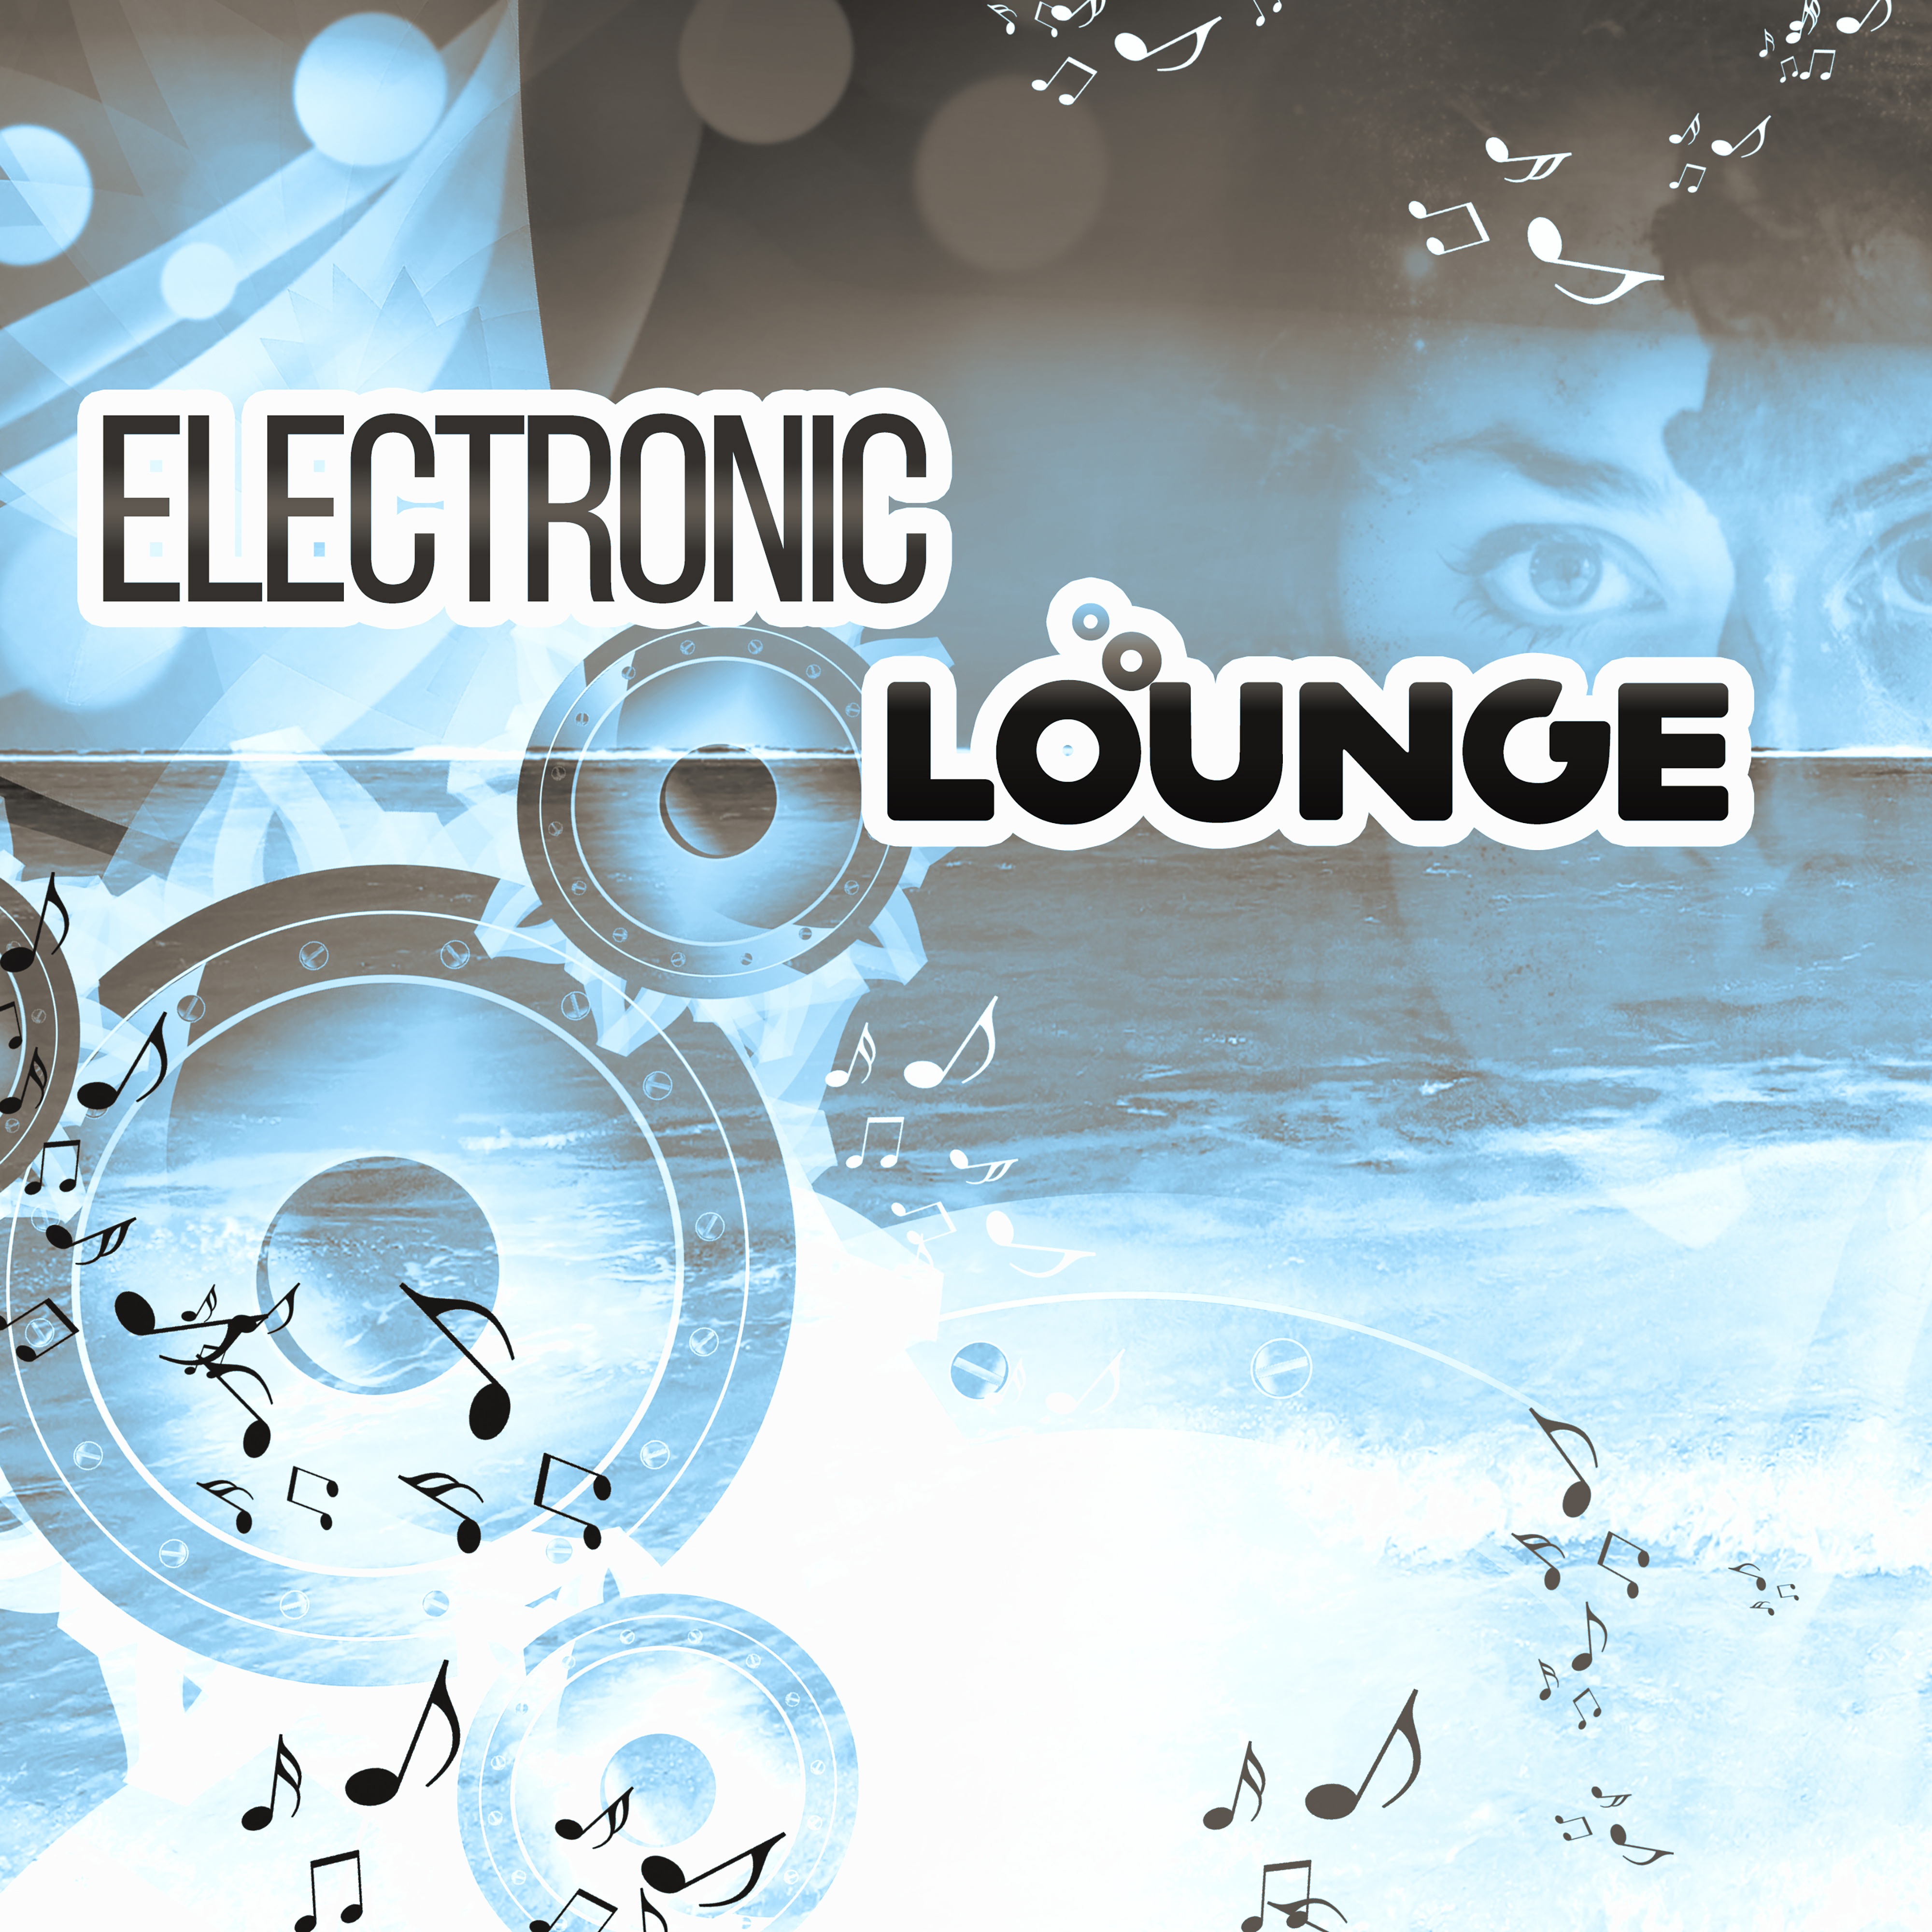 Electronic Lounge – Chillout Music, Lounge Ambient, Therapy Songs, Summertime, Relaxation Music